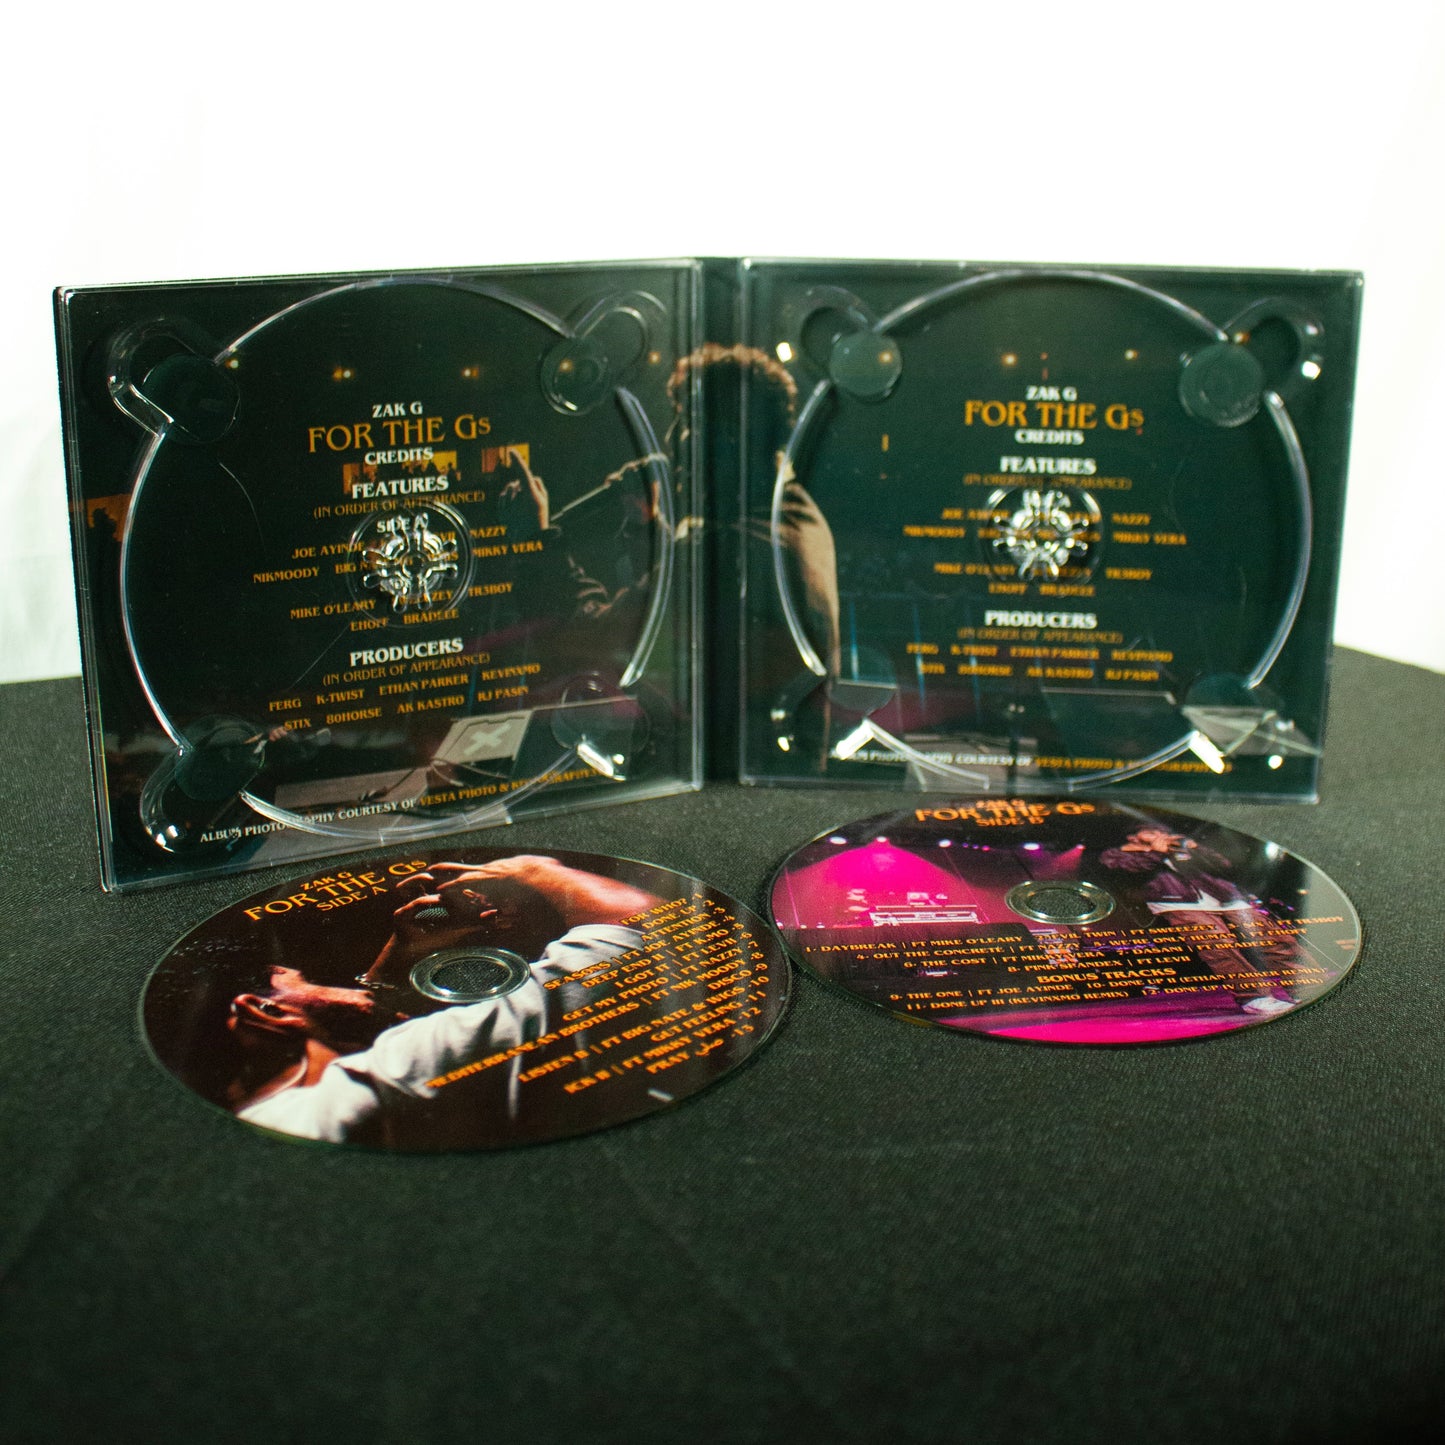 For The Gs Complete Edition (Signed Double Disc CD, digital download + bonus content)